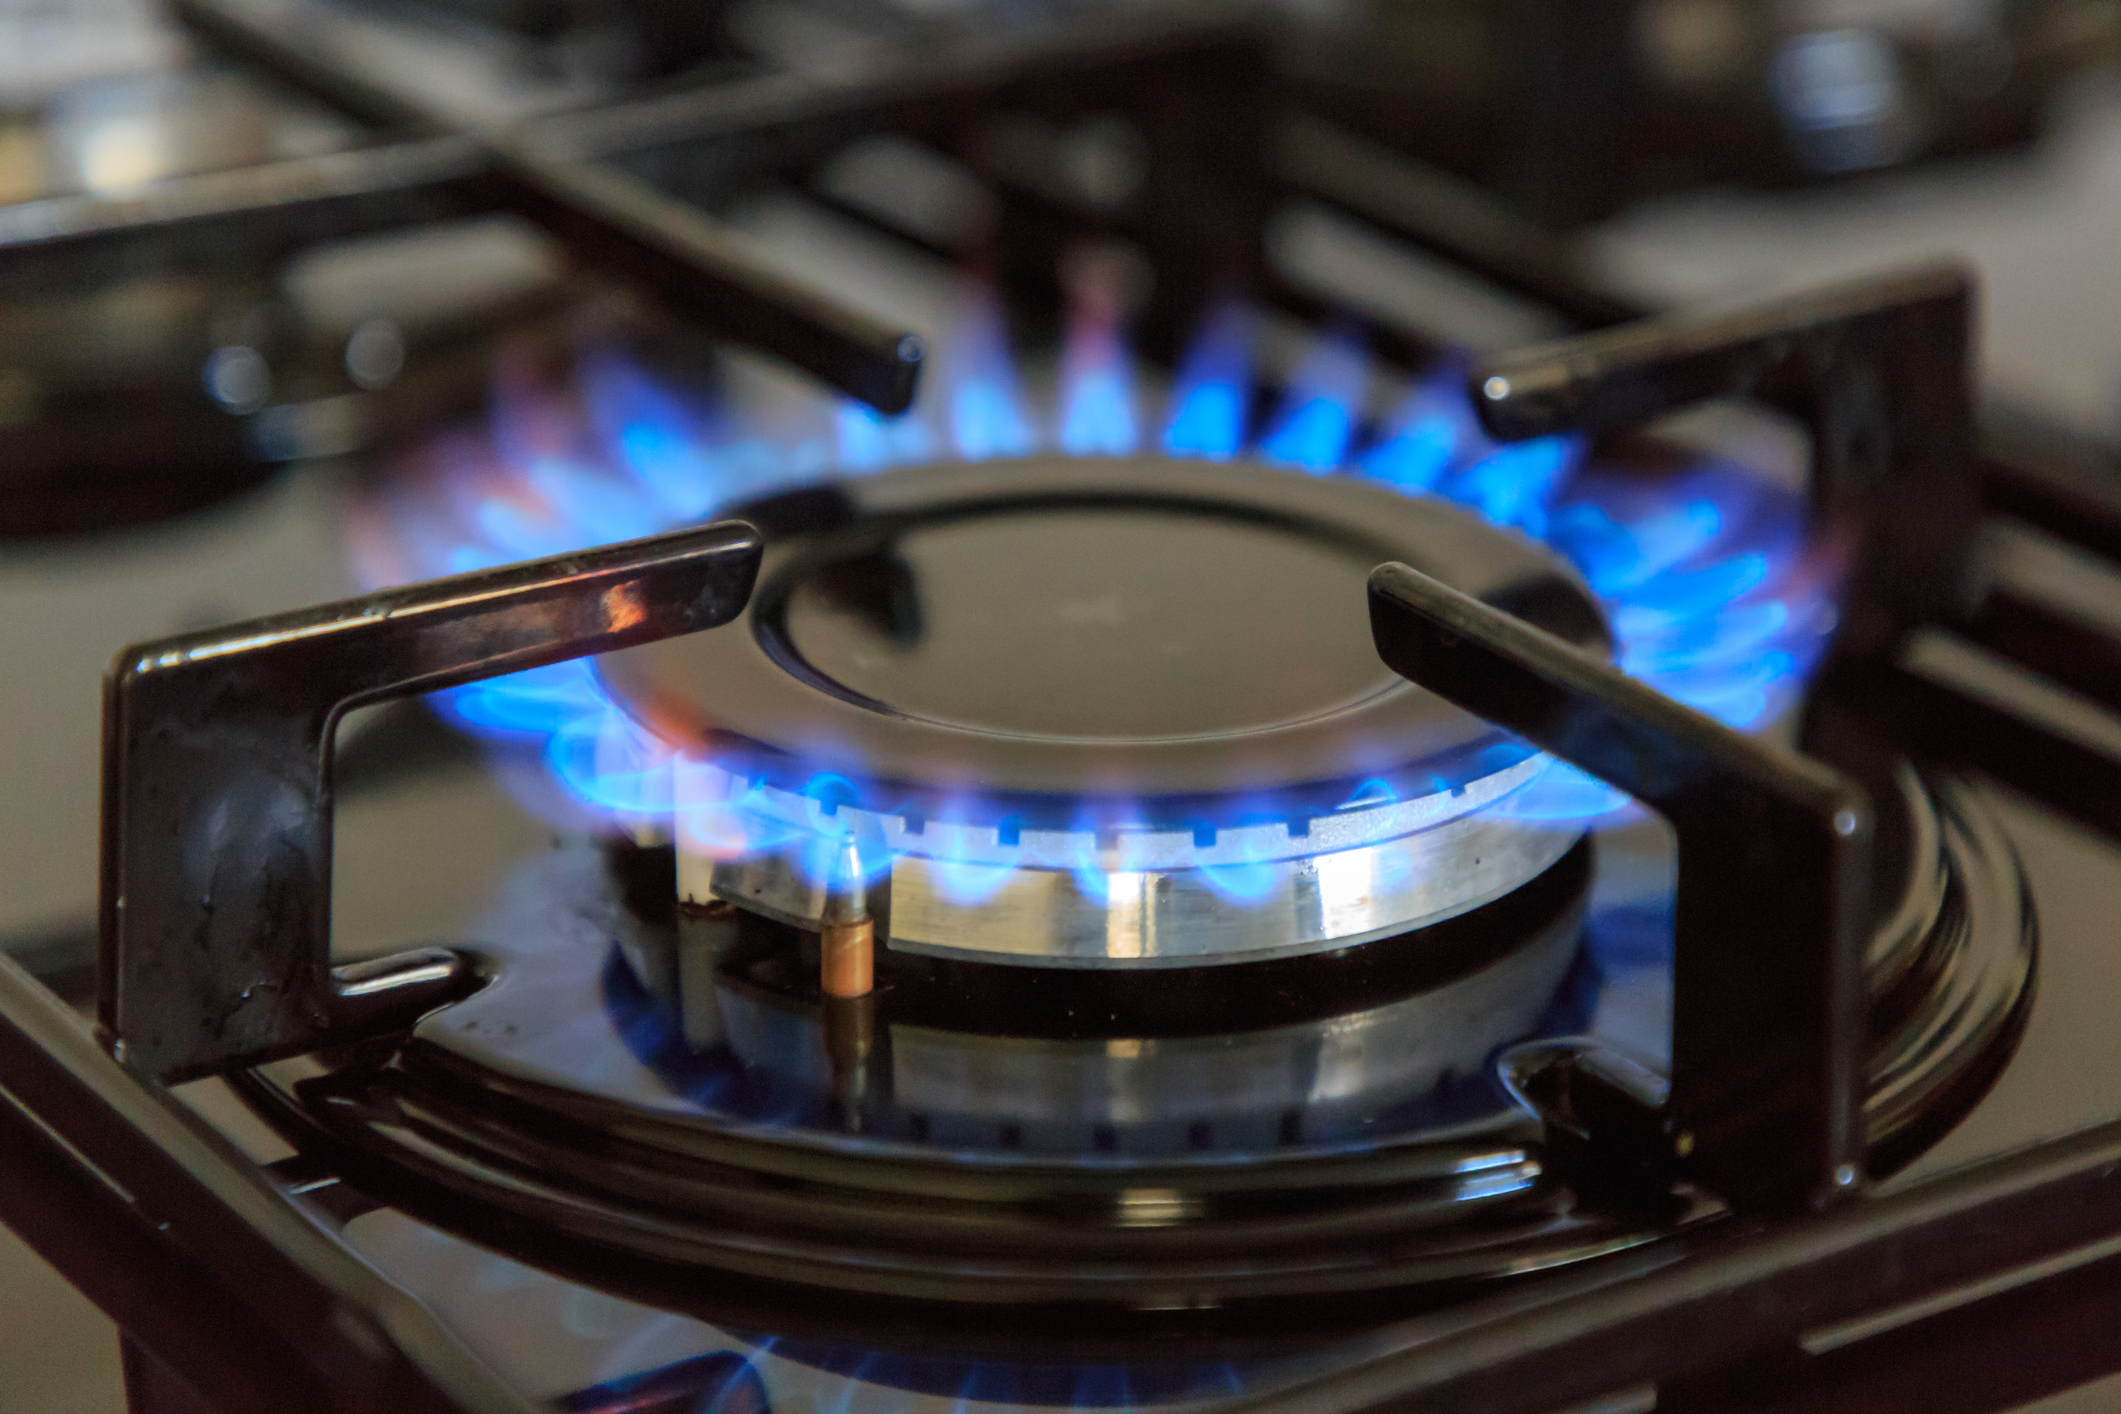 Gas stove health concerns were subject to government scrutiny in the 1980s  - Vox